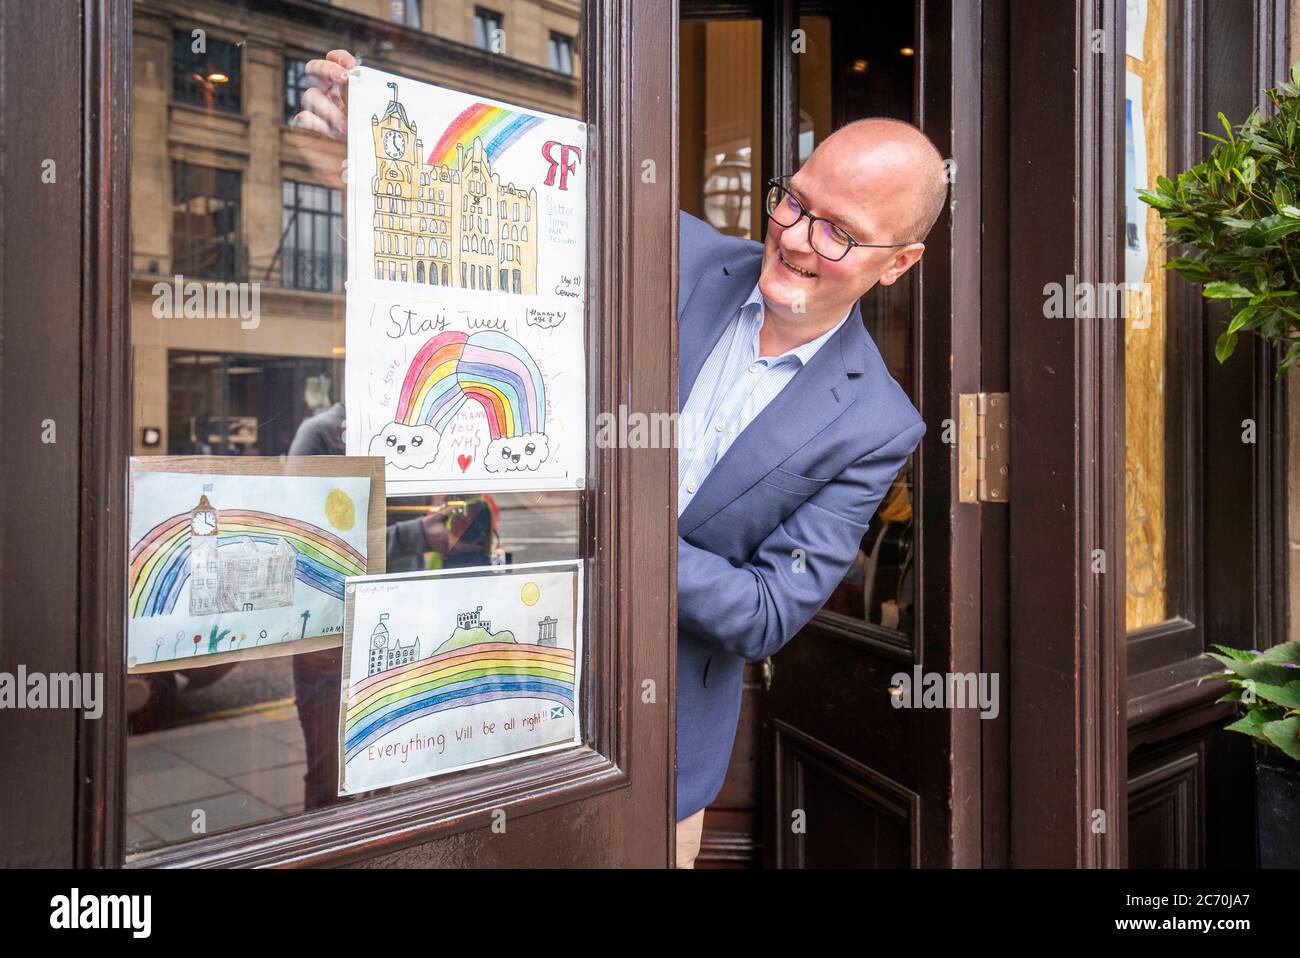 Rob Van Eyck, manager of The Balmoral, Edinburgh, looks at rainbow artwork produced by the children of staff members as the hotels starts to make preparations for re-opening next month as Scotland prepares for the lifting of further coronavirus lockdown restrictions. Stock Photo